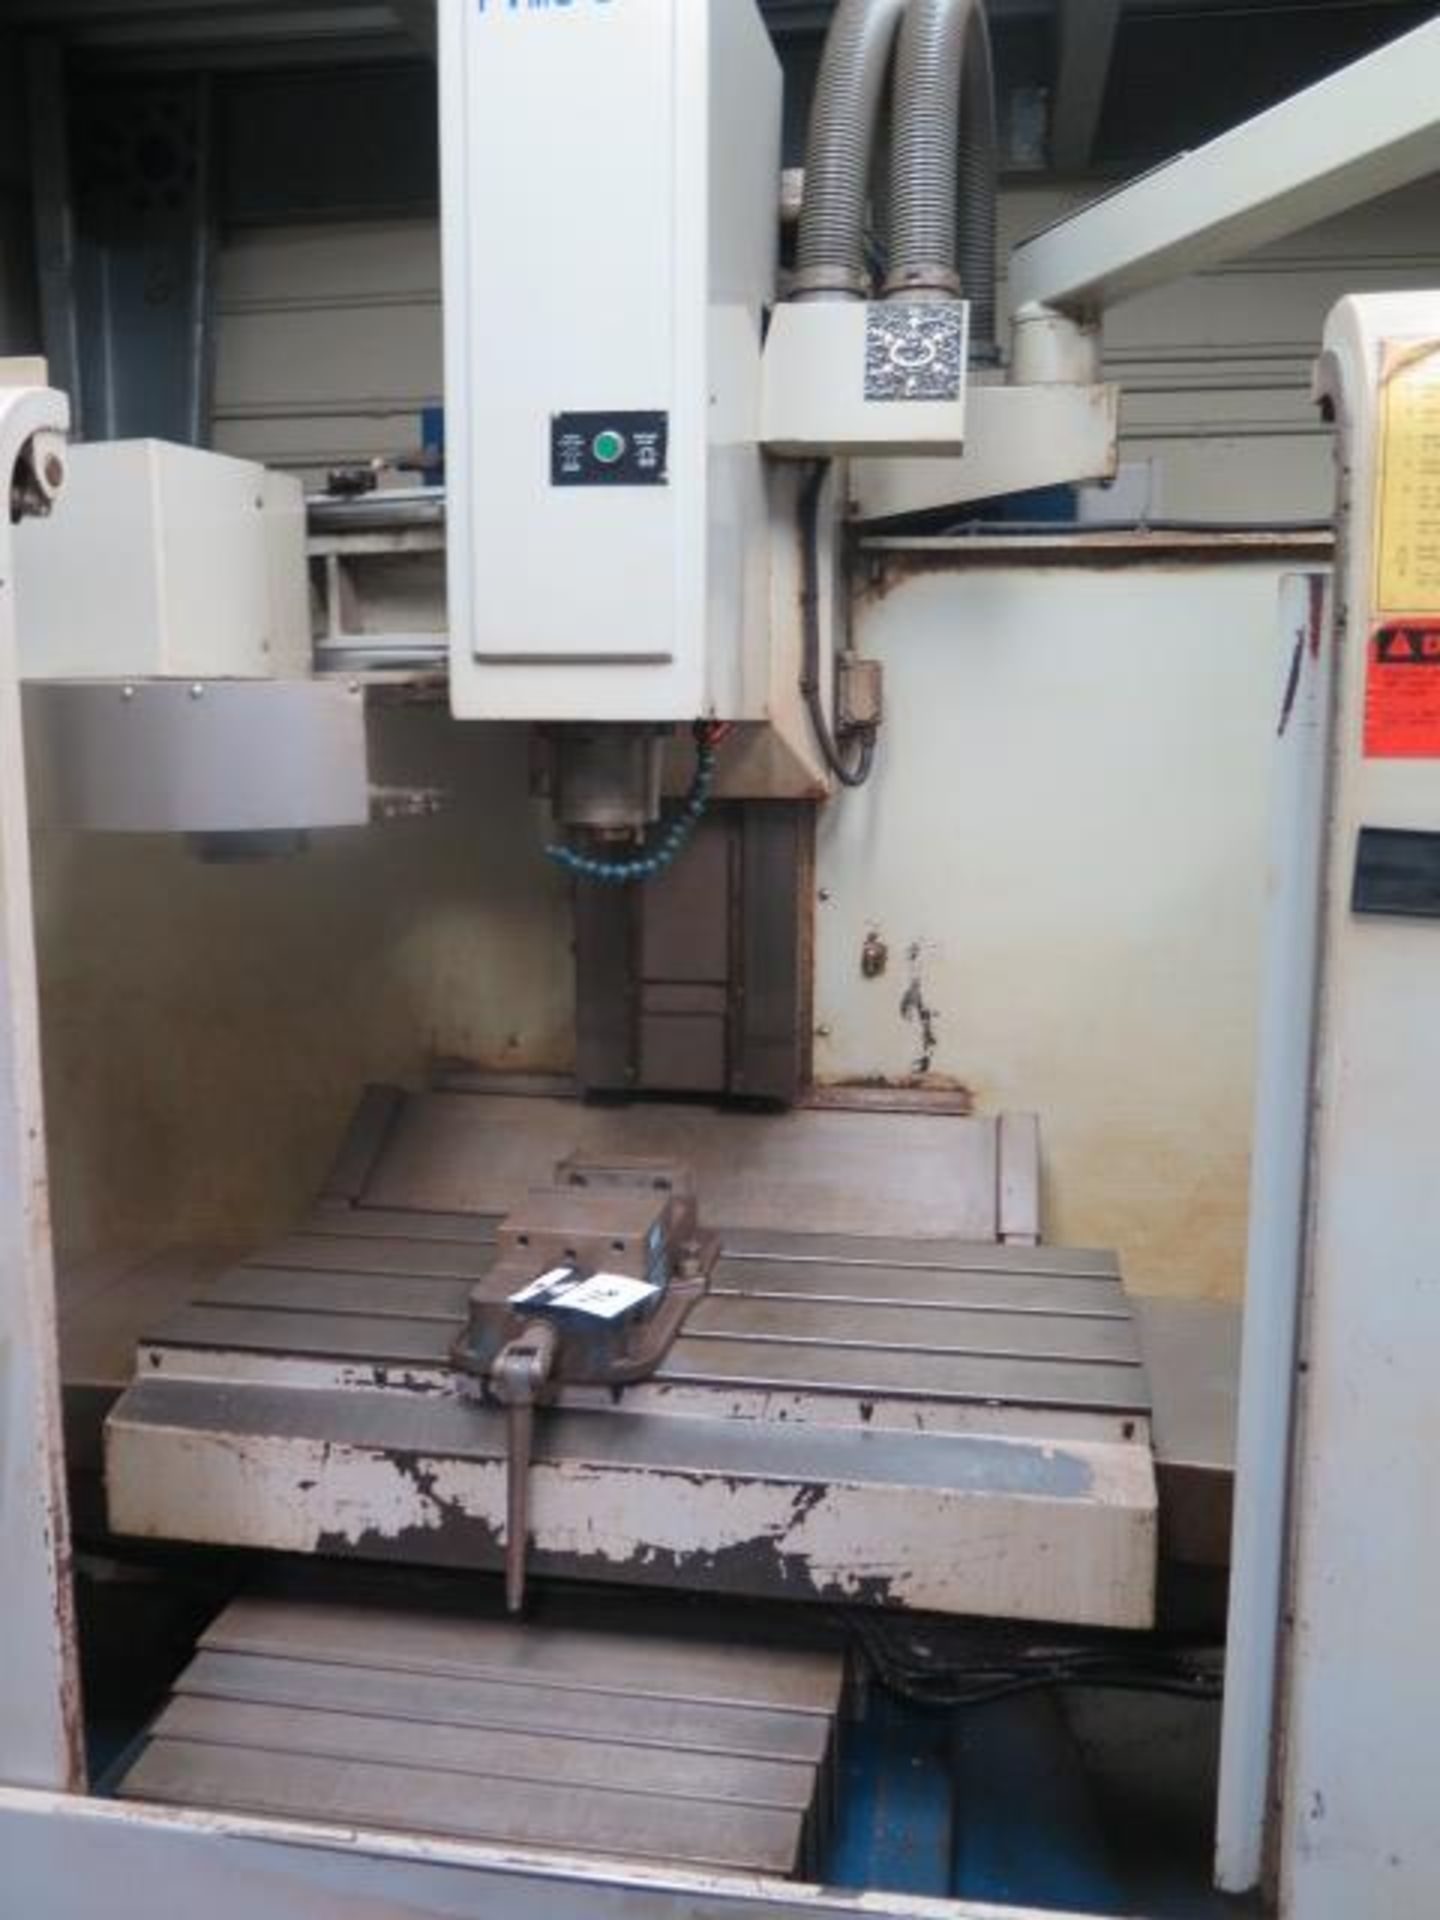 Acra FVMC-810 CNC VMC s/n V3013 w/ Mitsubishi Controls, 16-Station ATC, SOLD AS IS - Image 3 of 12